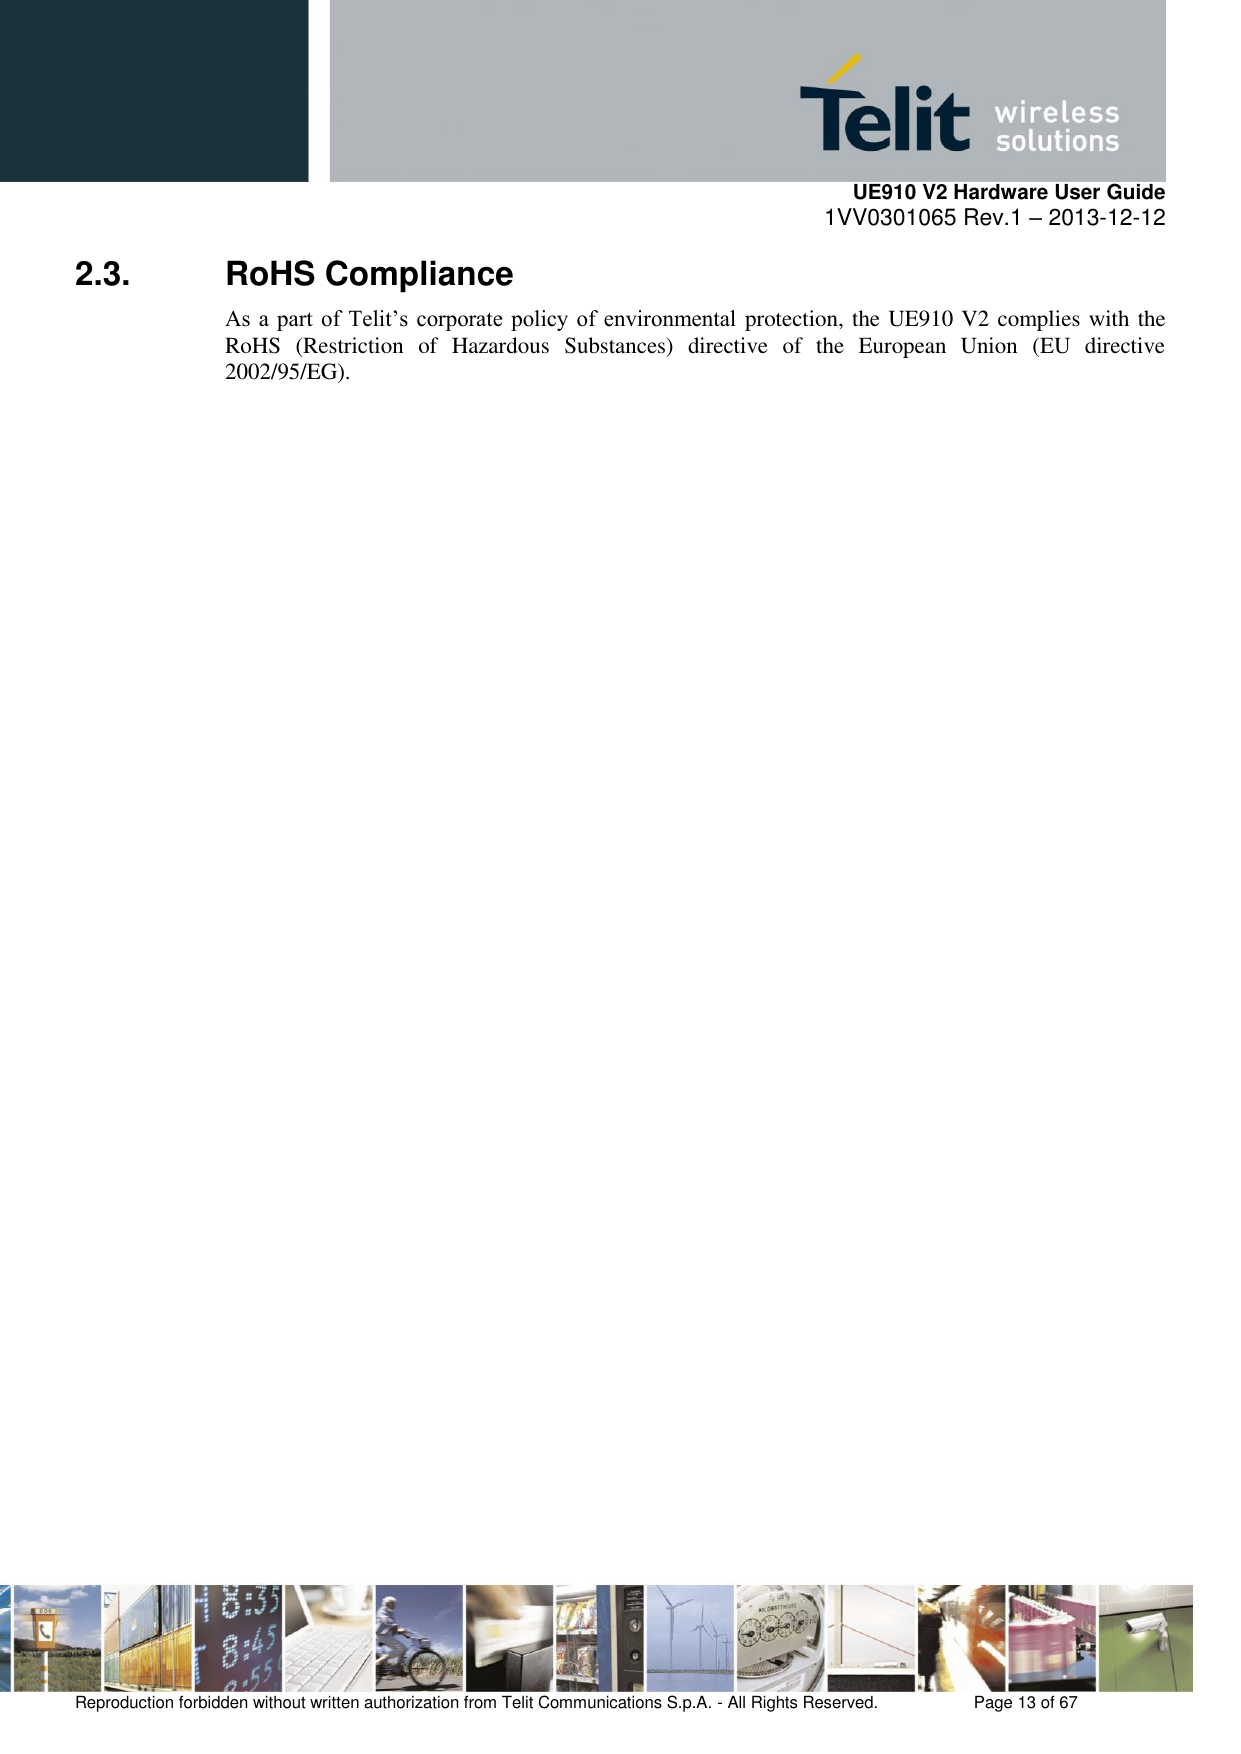     UE910 V2 Hardware User Guide 1VV0301065 Rev.1 – 2013-12-12  Reproduction forbidden without written authorization from Telit Communications S.p.A. - All Rights Reserved.    Page 13 of 67                                                     2.3.  RoHS Compliance As a part of Telit’s corporate policy of  environmental protection, the UE910 V2 complies with the RoHS  (Restriction  of  Hazardous  Substances)  directive  of  the  European  Union  (EU  directive 2002/95/EG).  